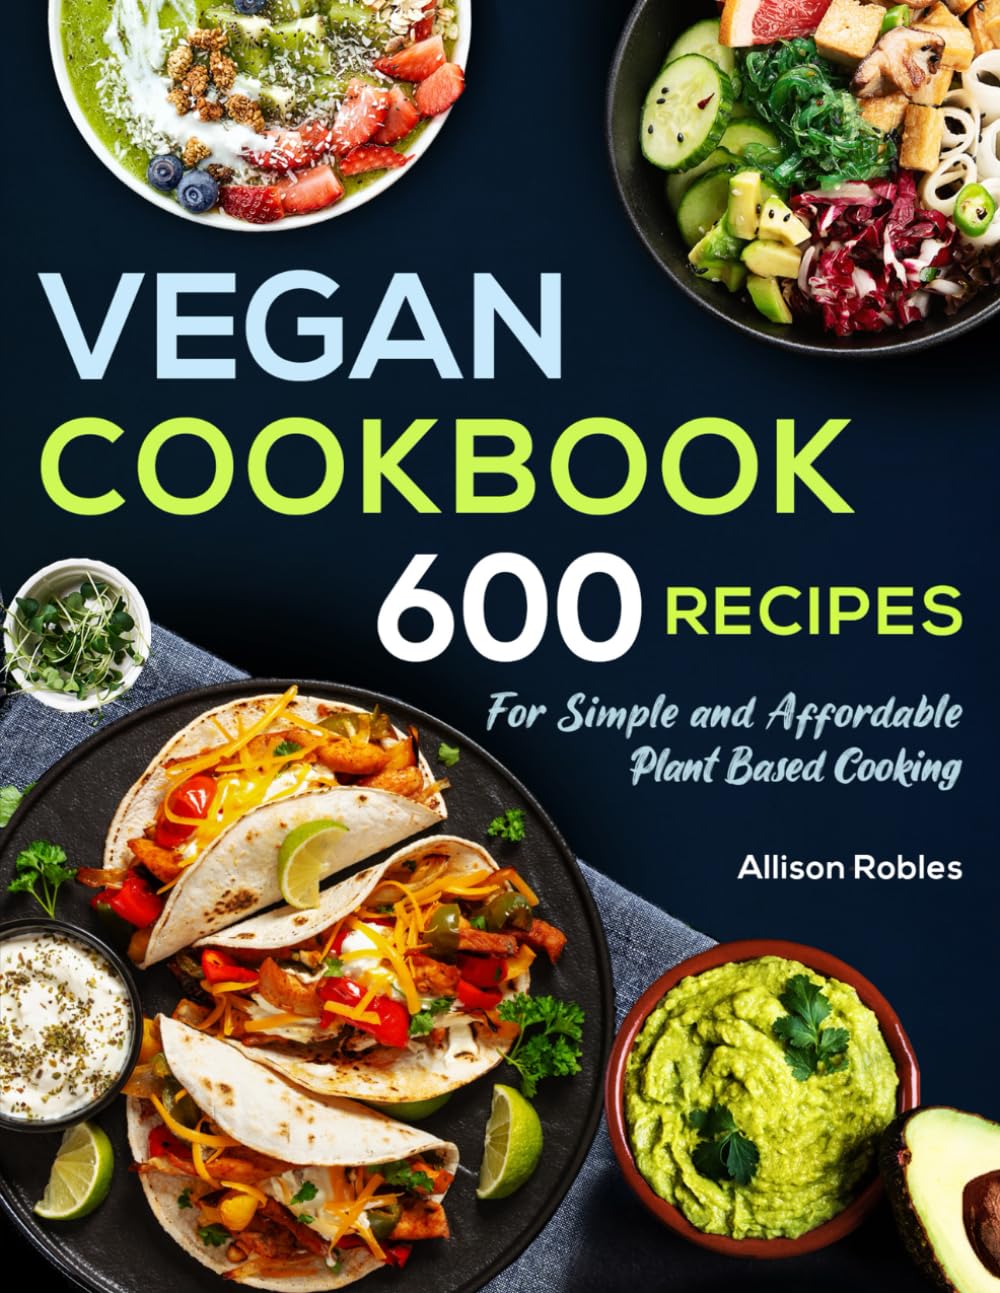 Vegan Cookbook: 600 Recipes For Simple and Affordable Plant Based Cooking